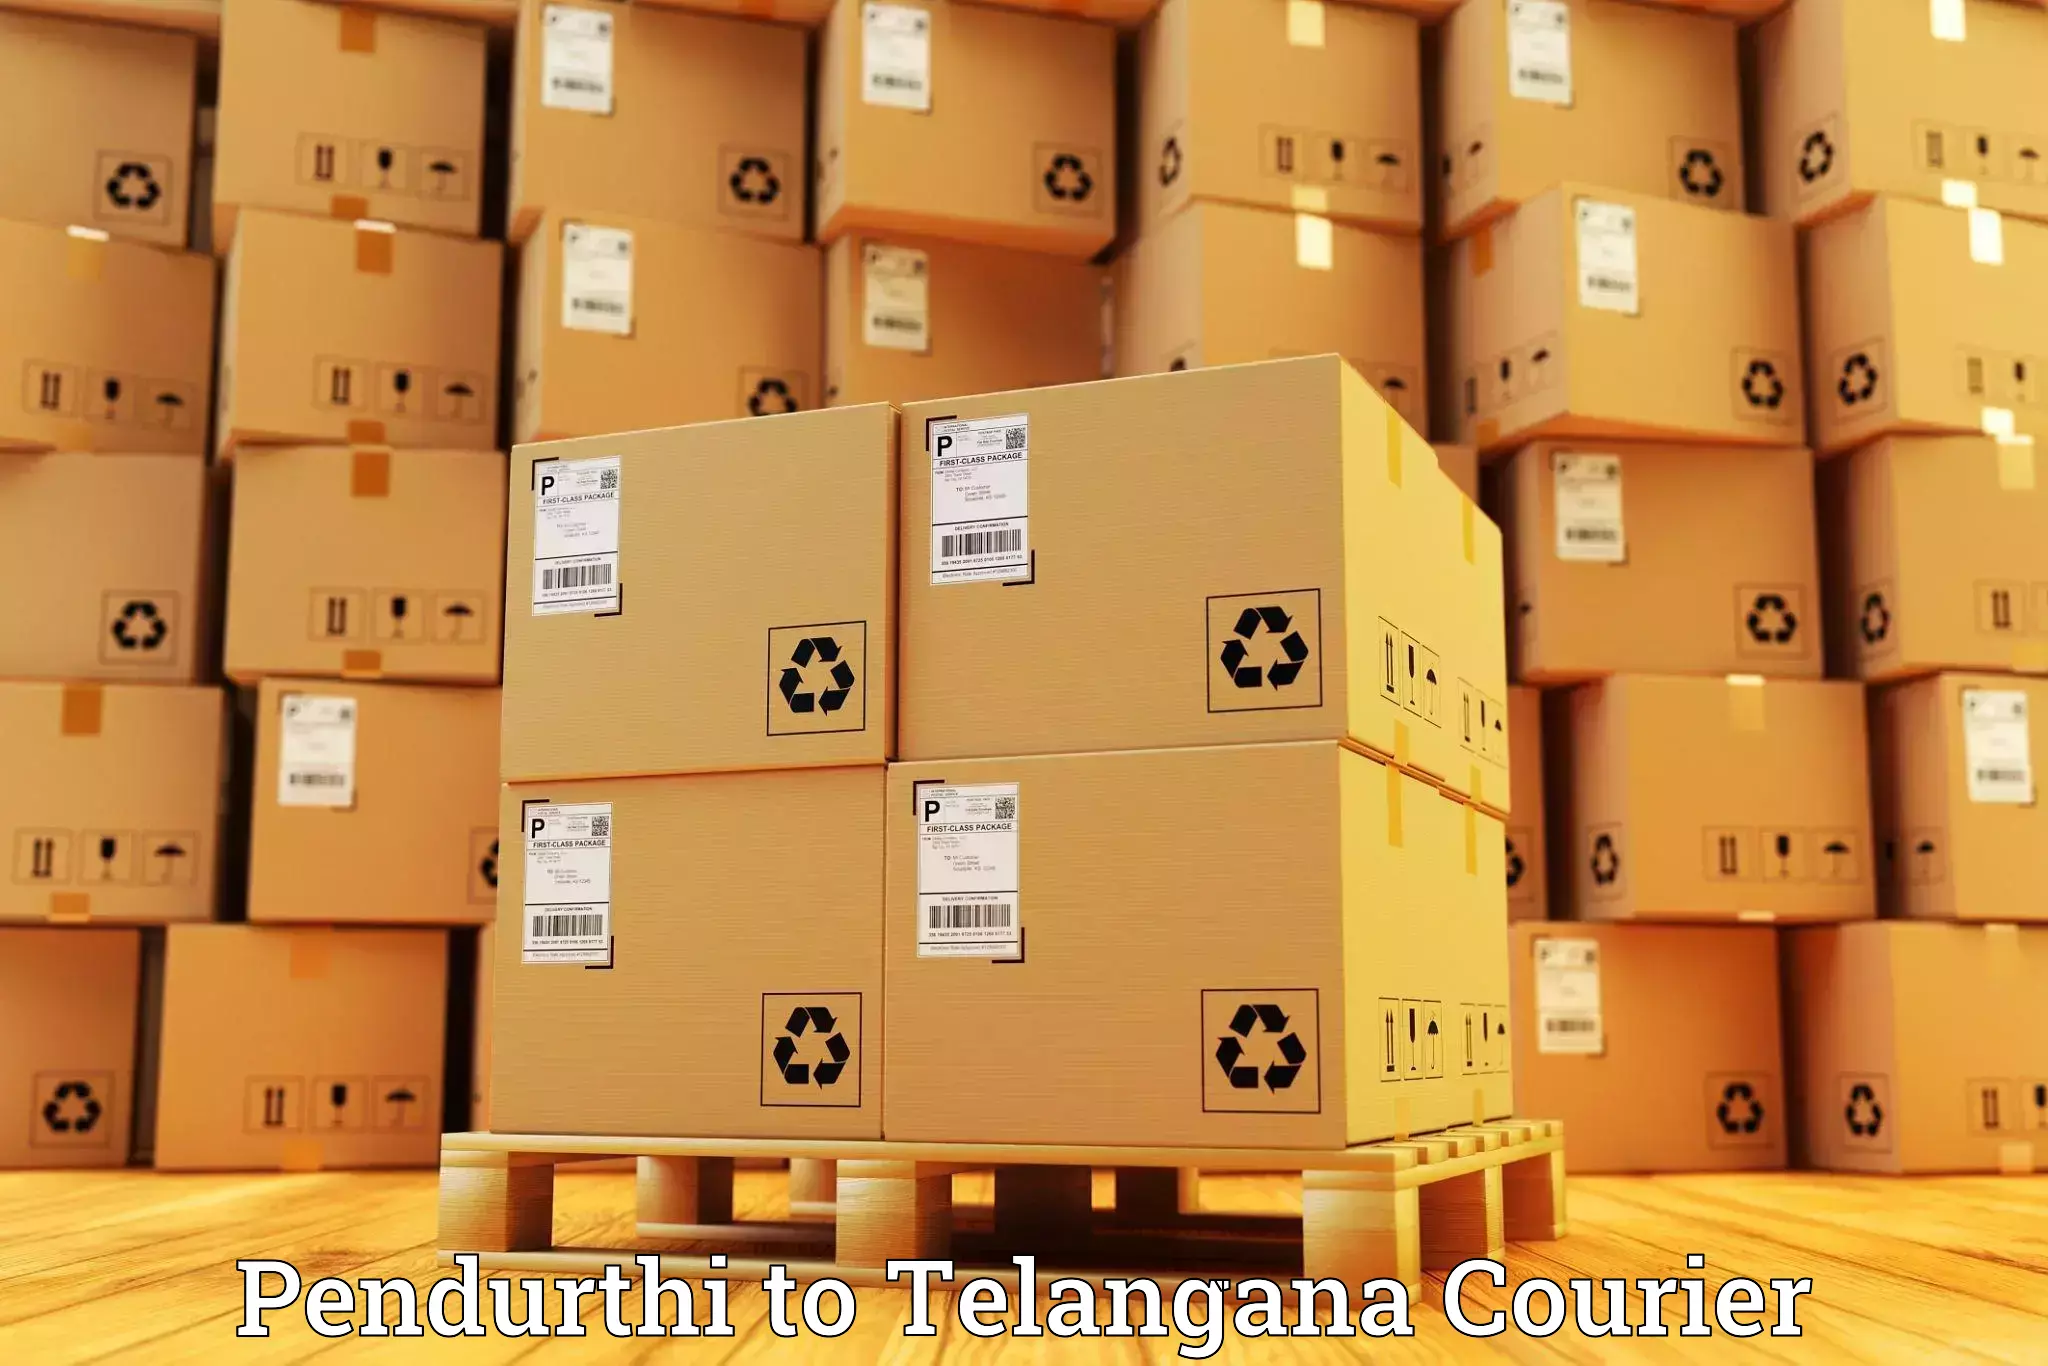 Comprehensive parcel tracking in Pendurthi to Yellareddy